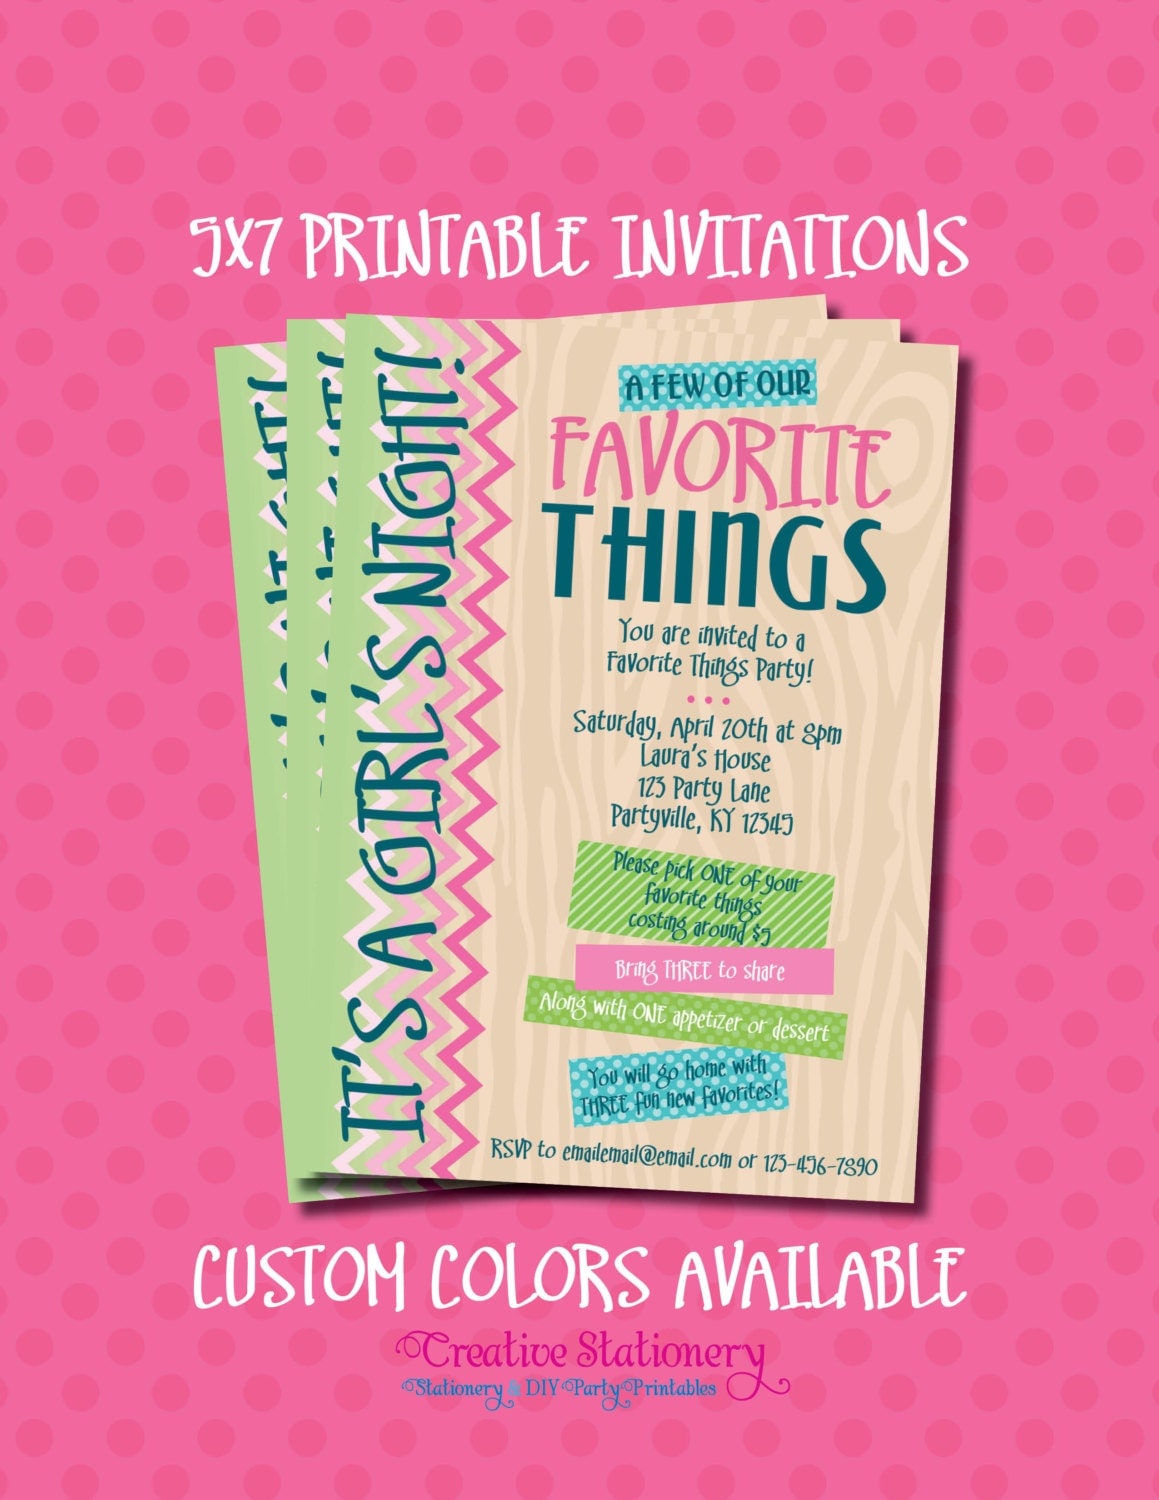 Favorite Things Party Invitations. Printable by CreativeStationery